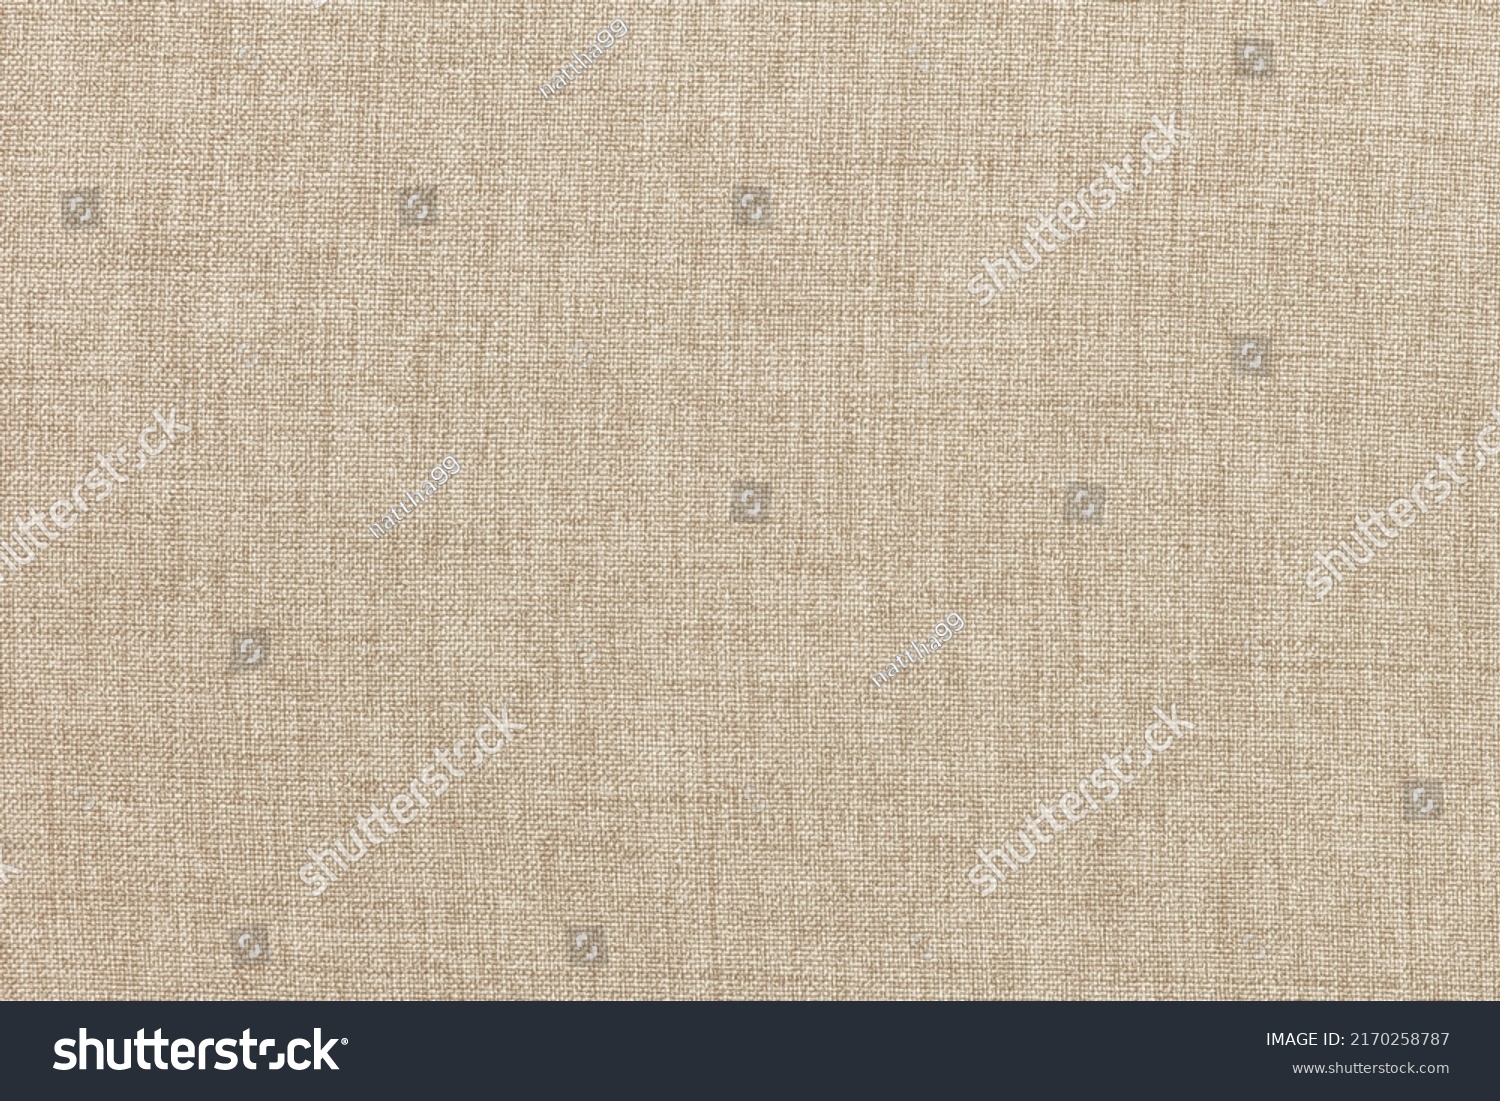 Brown linen fabric texture background, seamless pattern of natural textile. #2170258787